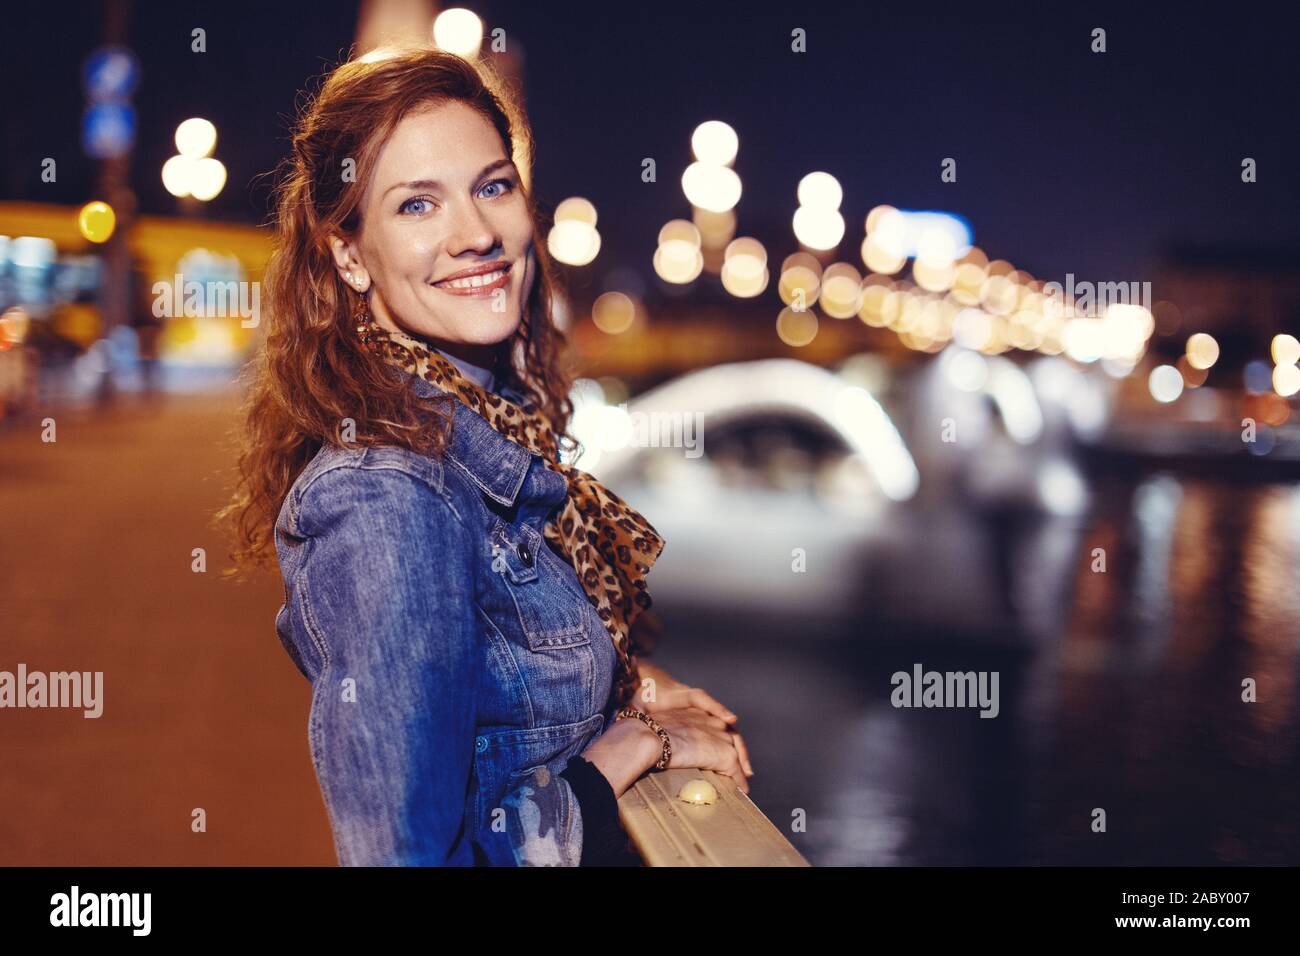 https://c8.alamy.com/comp/2ABY007/young-hungarian-woman-smiling-on-margaret-bridge-at-night-budapest-hungary-2ABY007.jpg